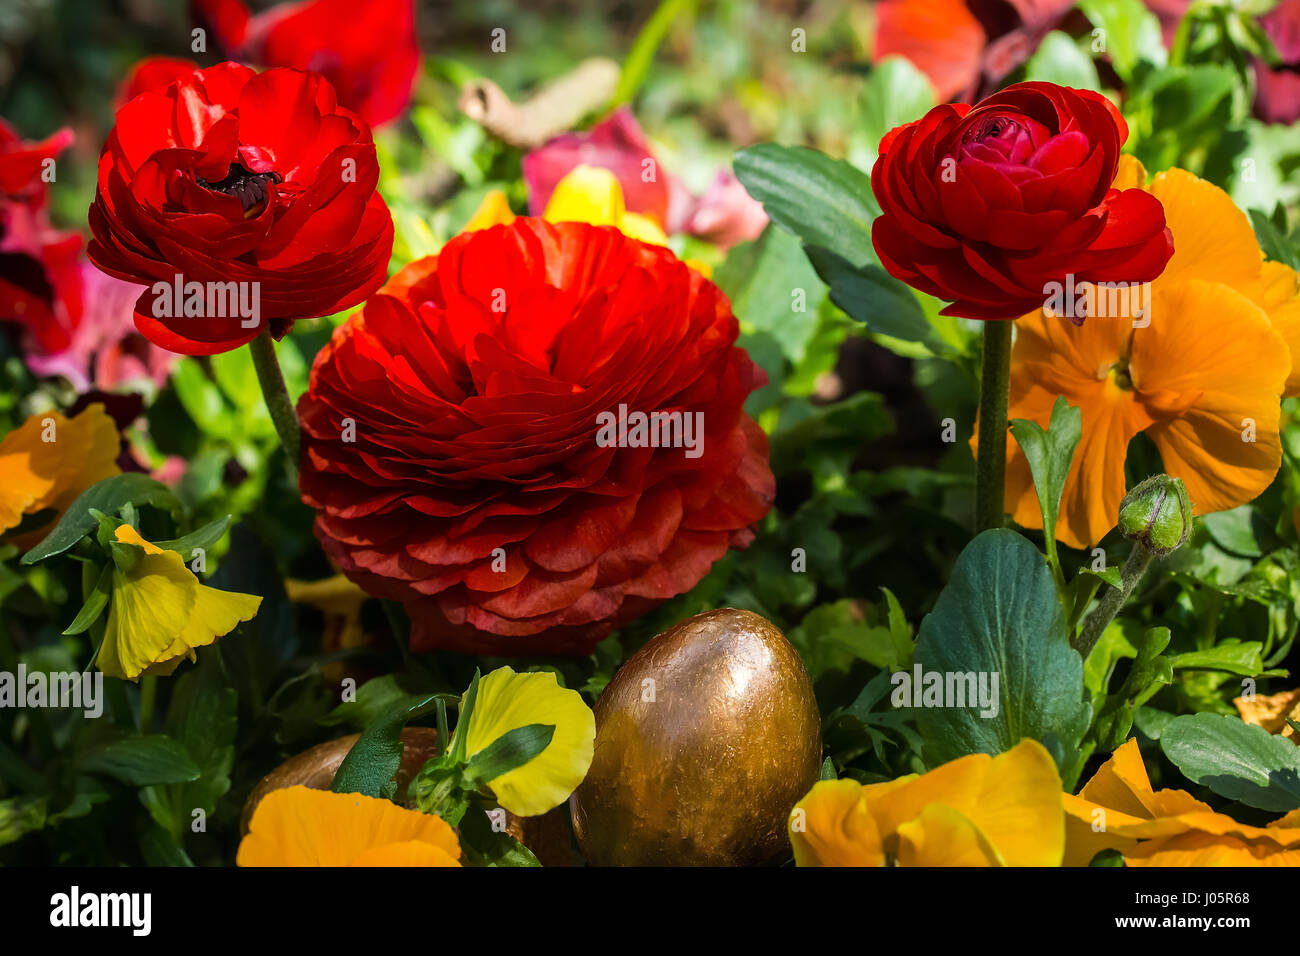 Golden eggs hidden in a flower bed of yellow pansies and red ranunculus. Stock Photo